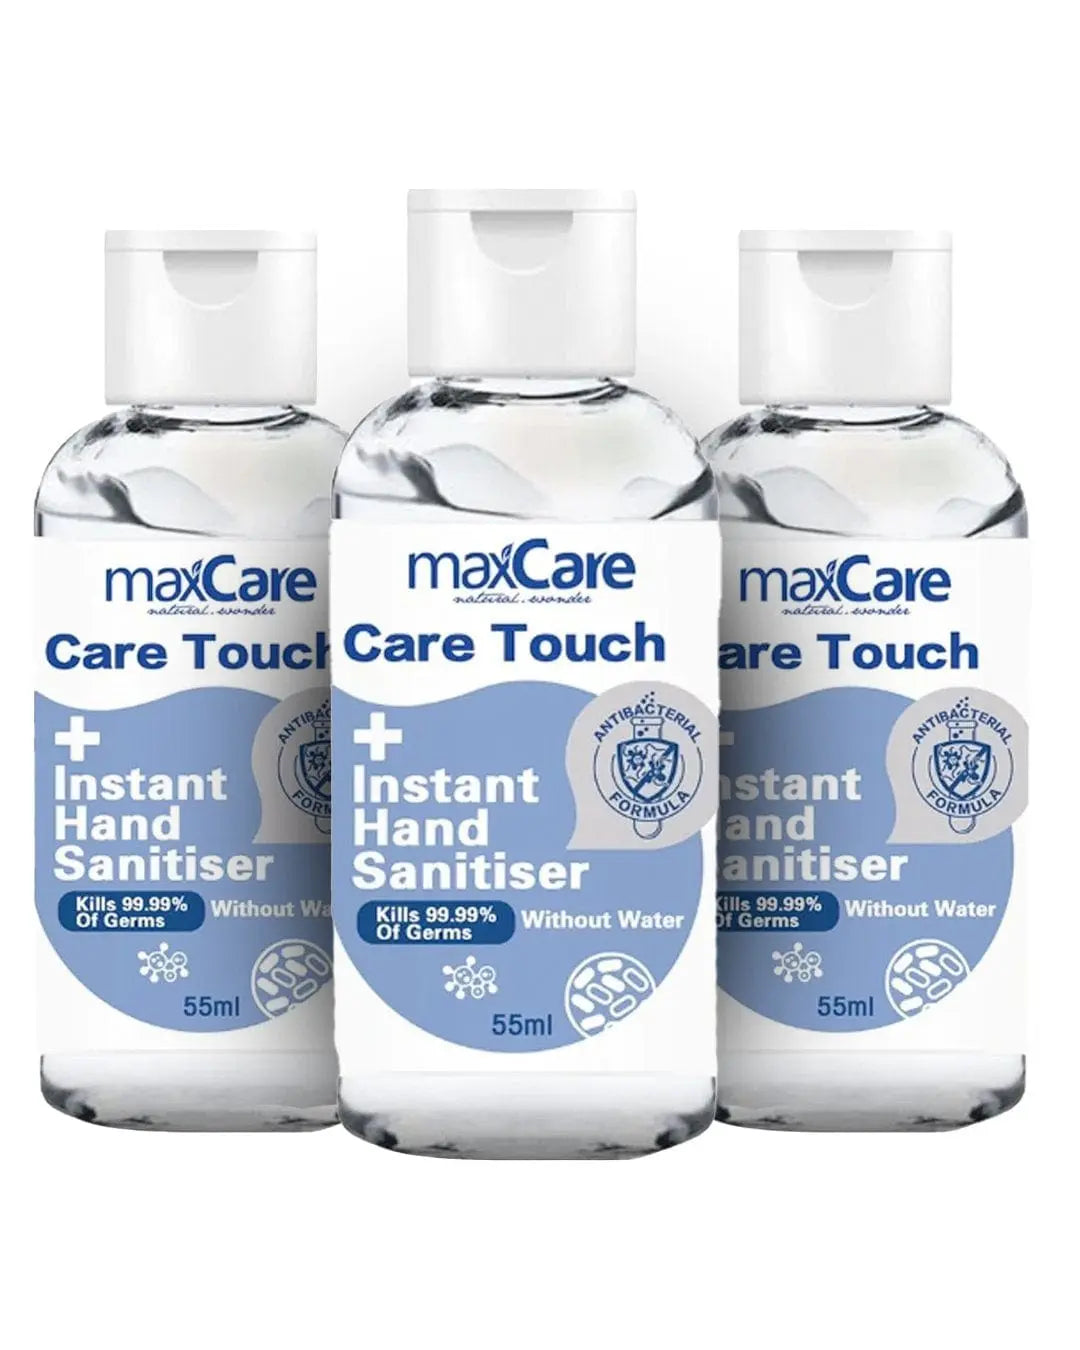 Max Care Hand Sanitiser (75% Alc.) Multipack, 3 x 55 ml Hand Sanitizers